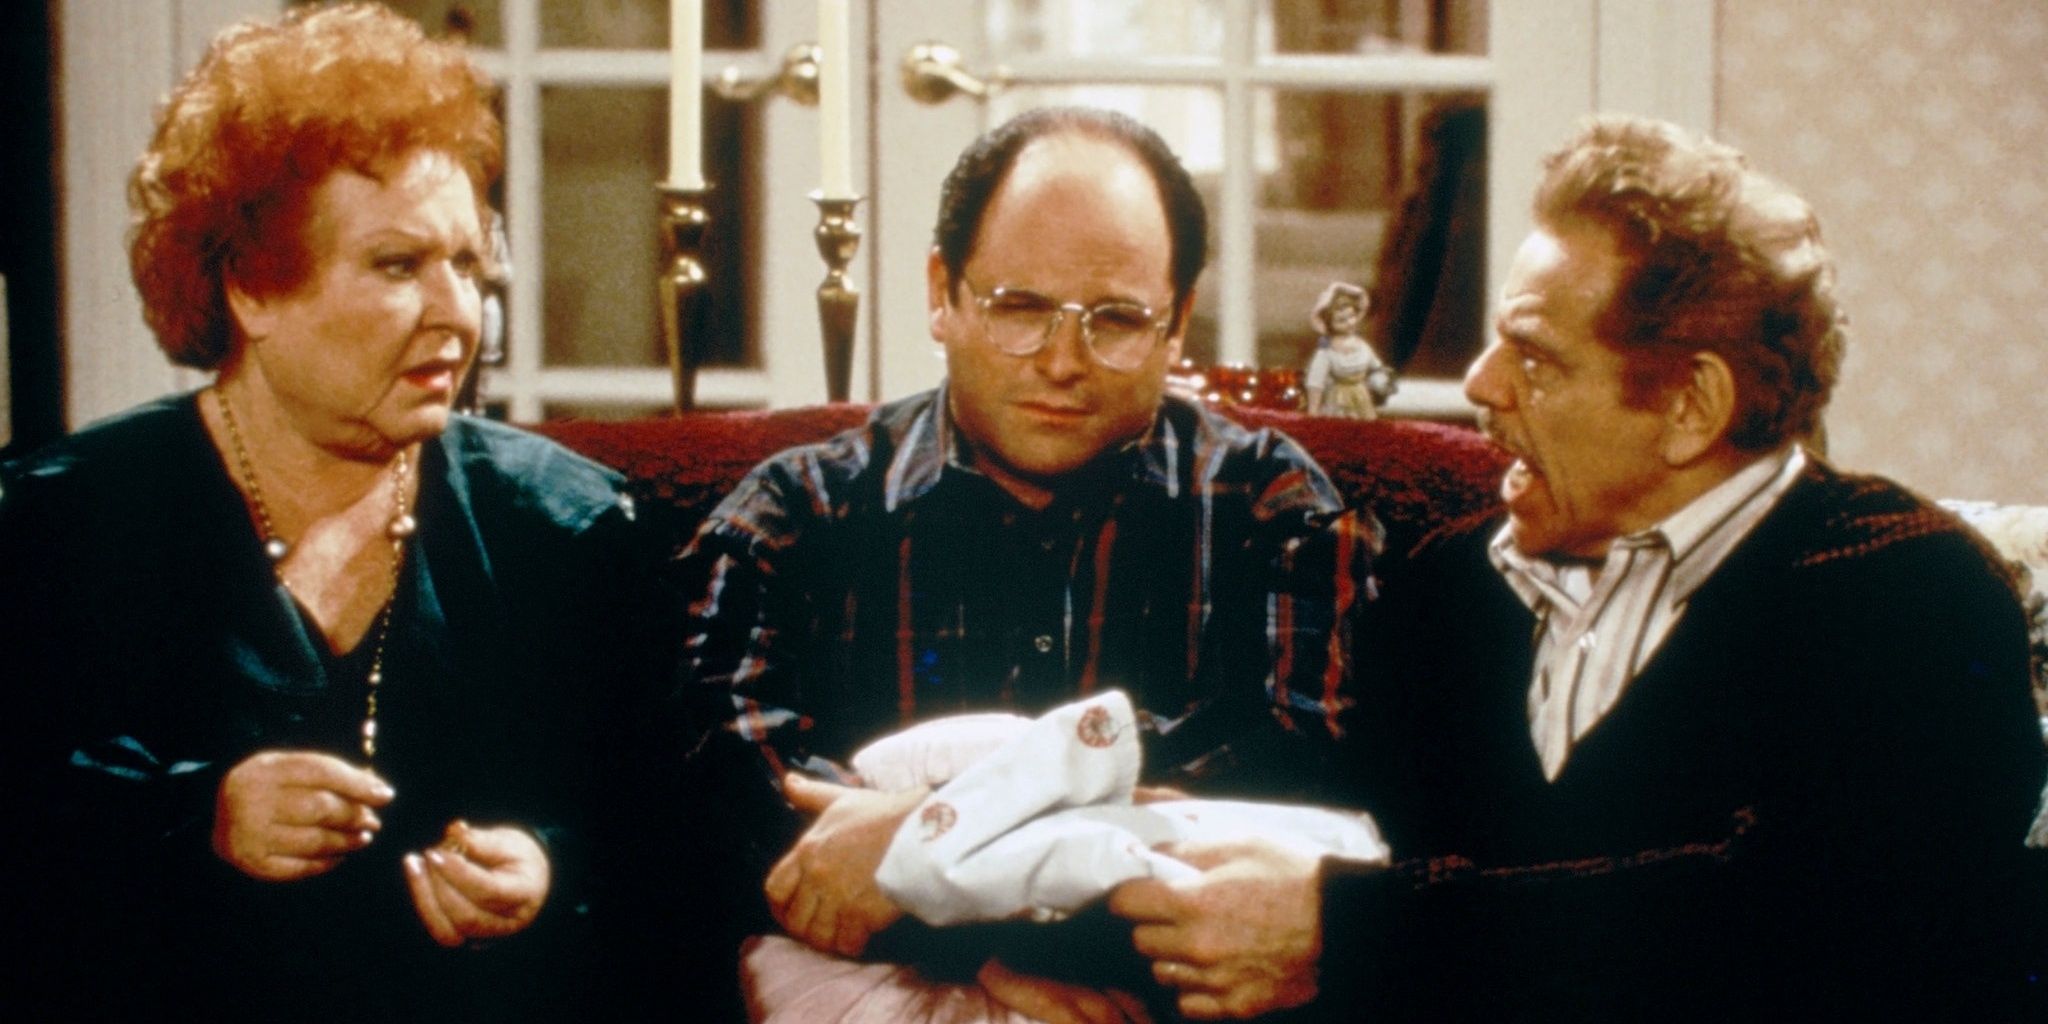 Estelle, George, and Frank sitting on the couch on Seinfeld